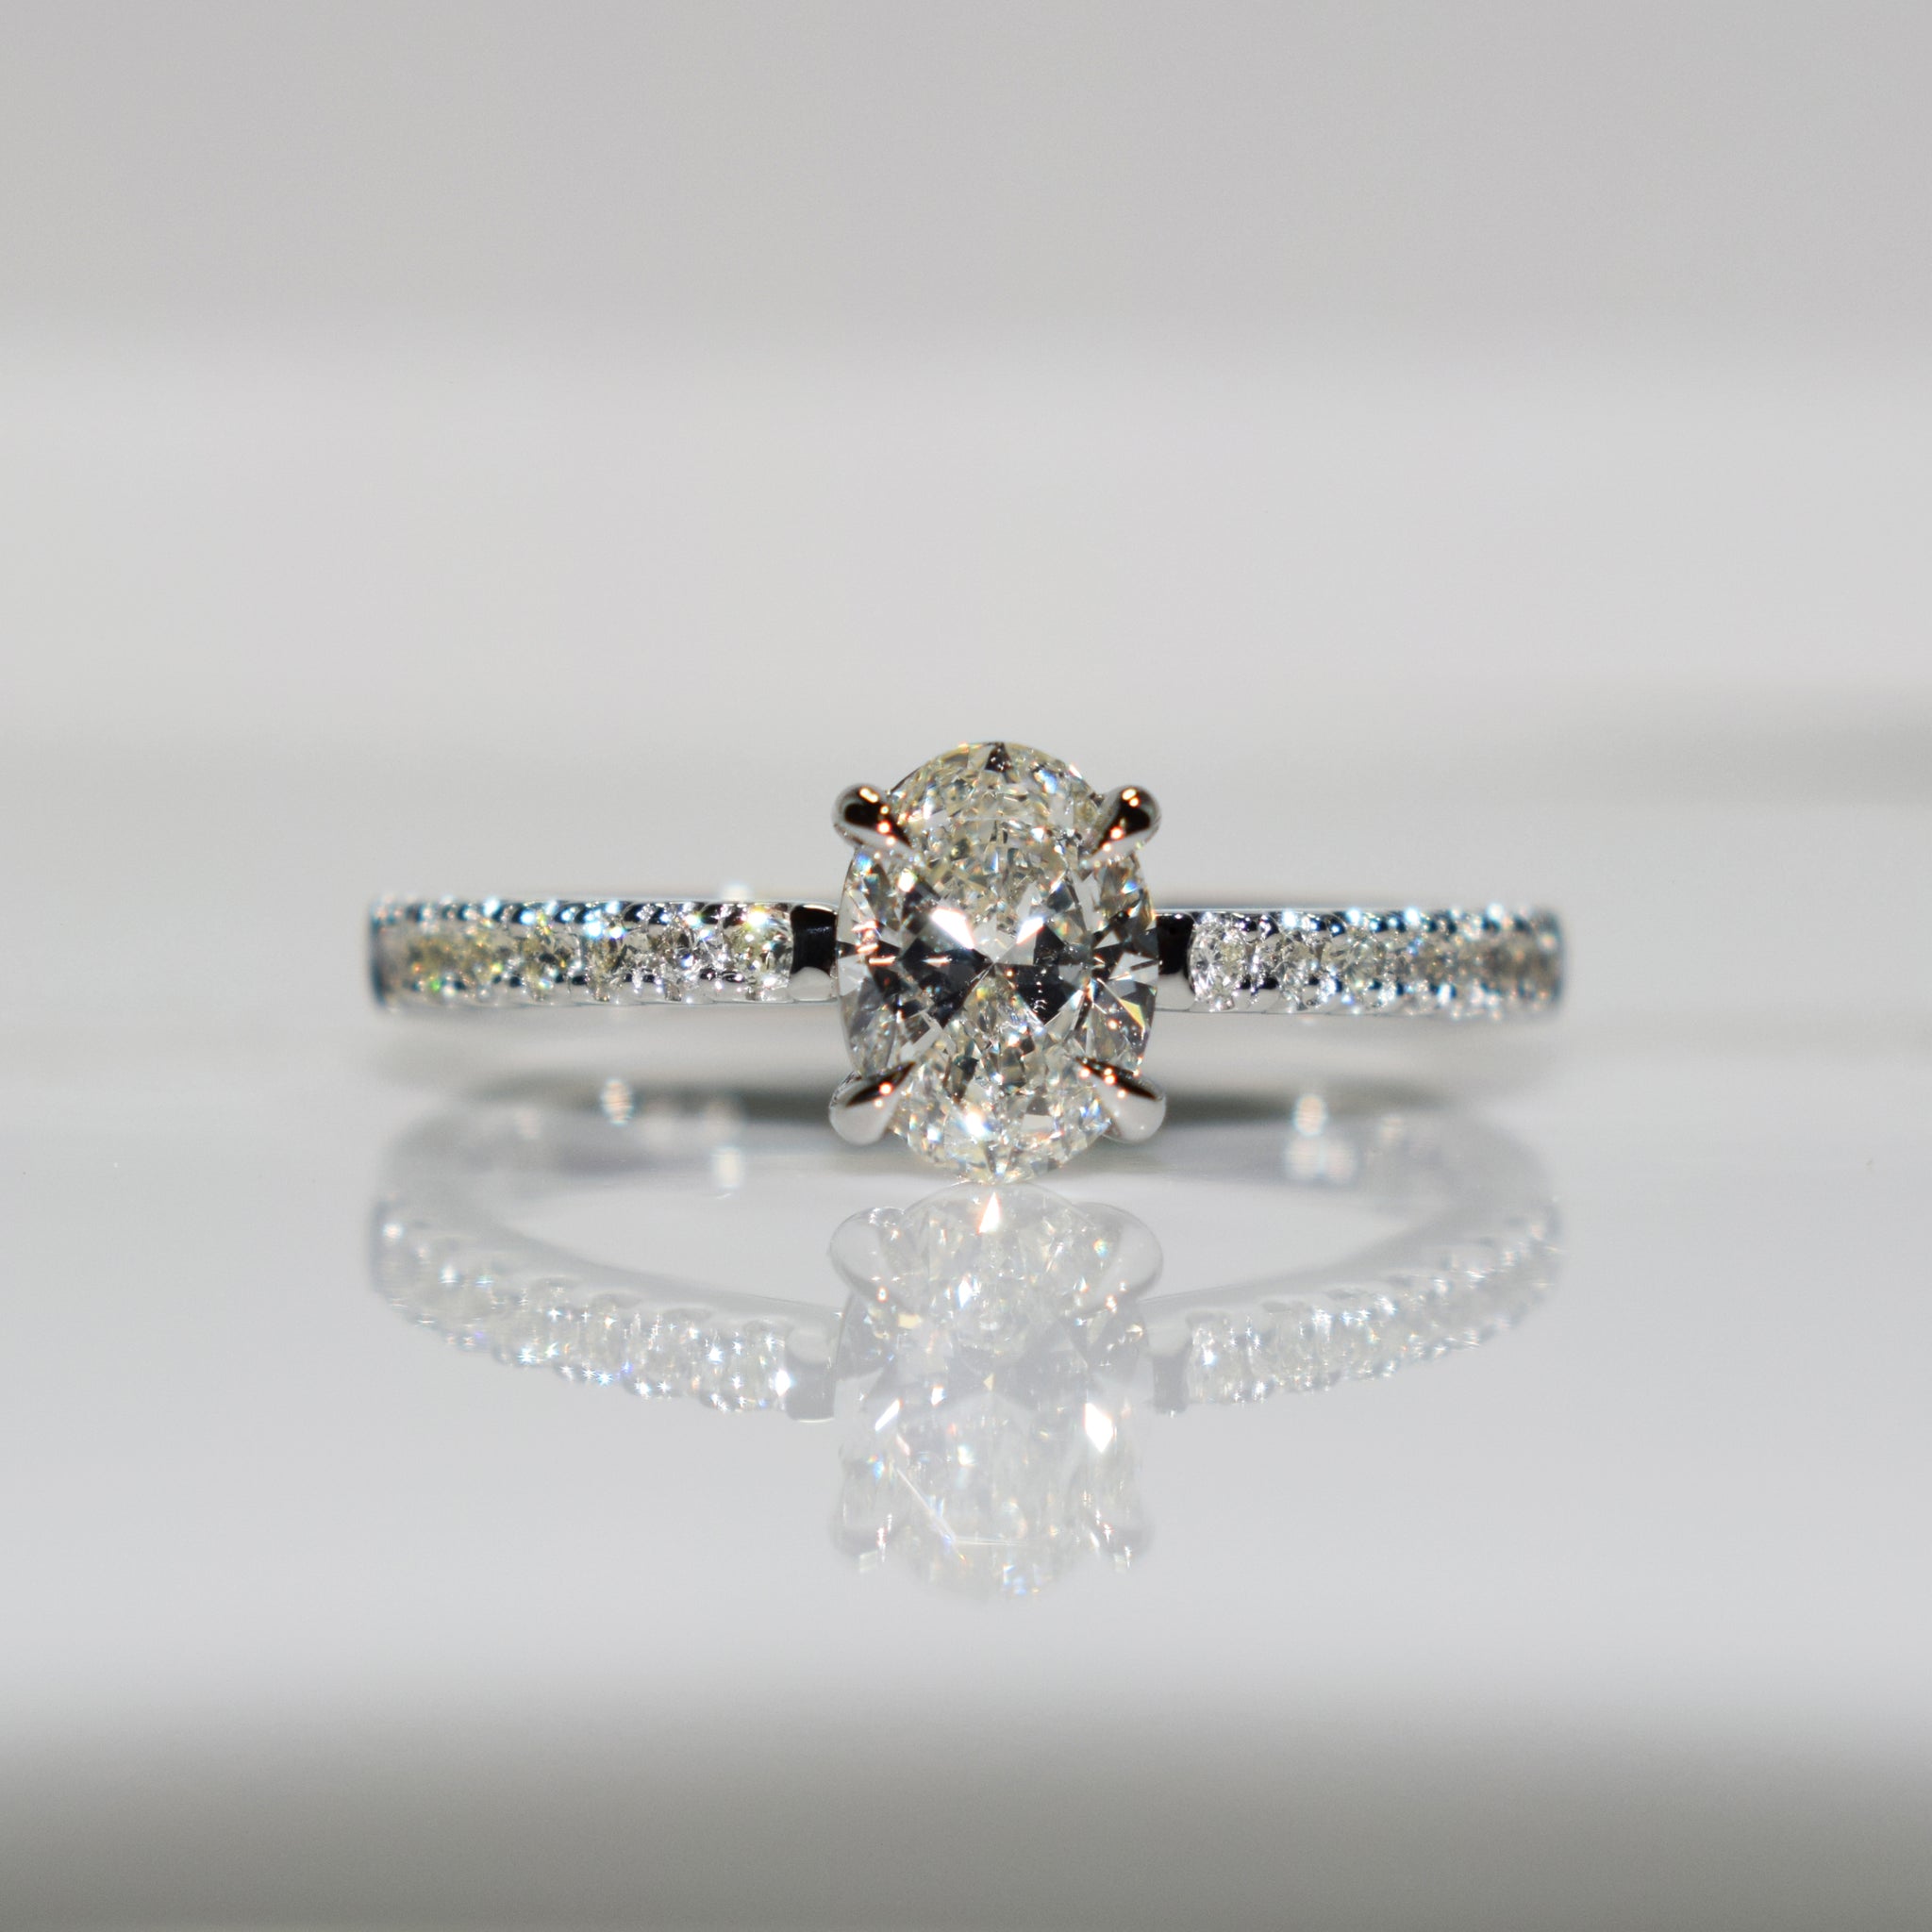 Oval diamond solitaire set with eagle claws in platinum